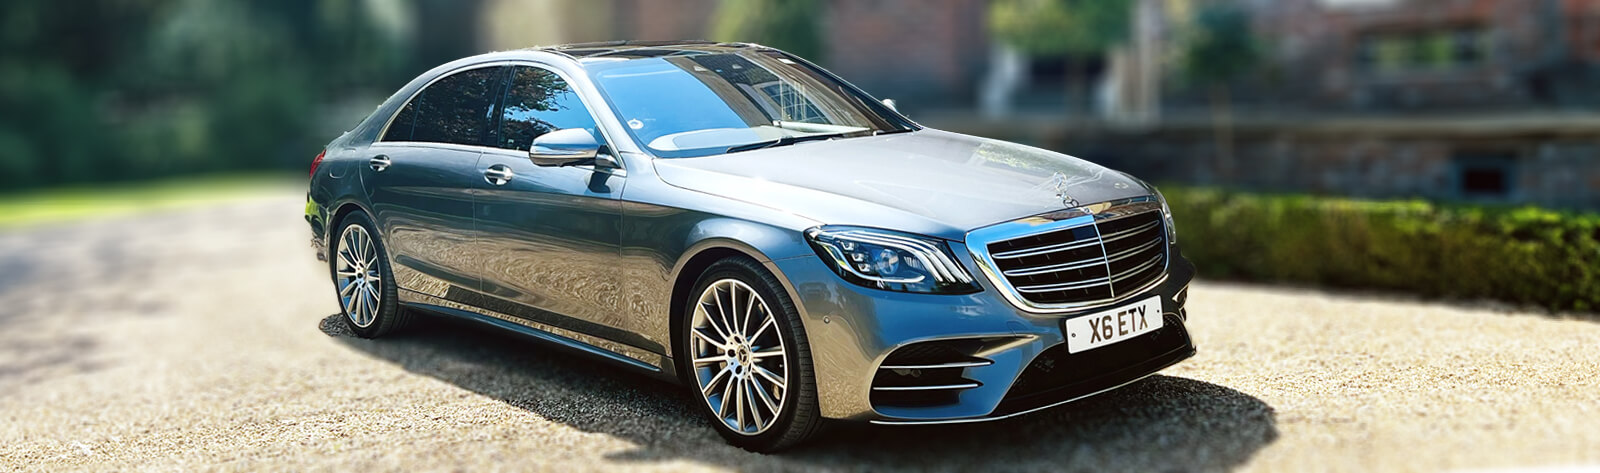 mercedes v class and mercedes s class Cheadle